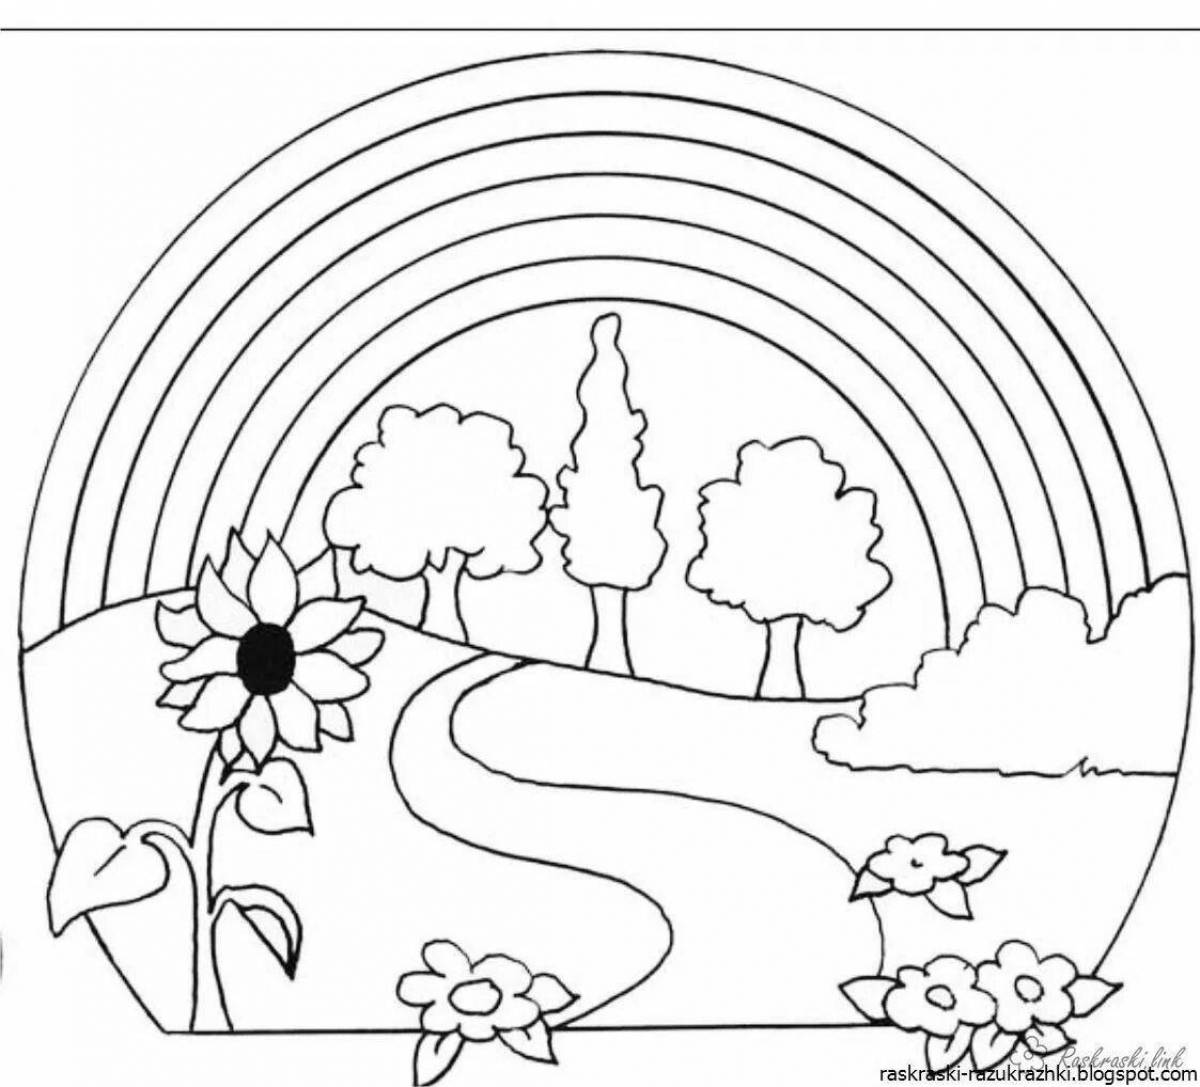 Serene nature coloring book for 7-8 year olds